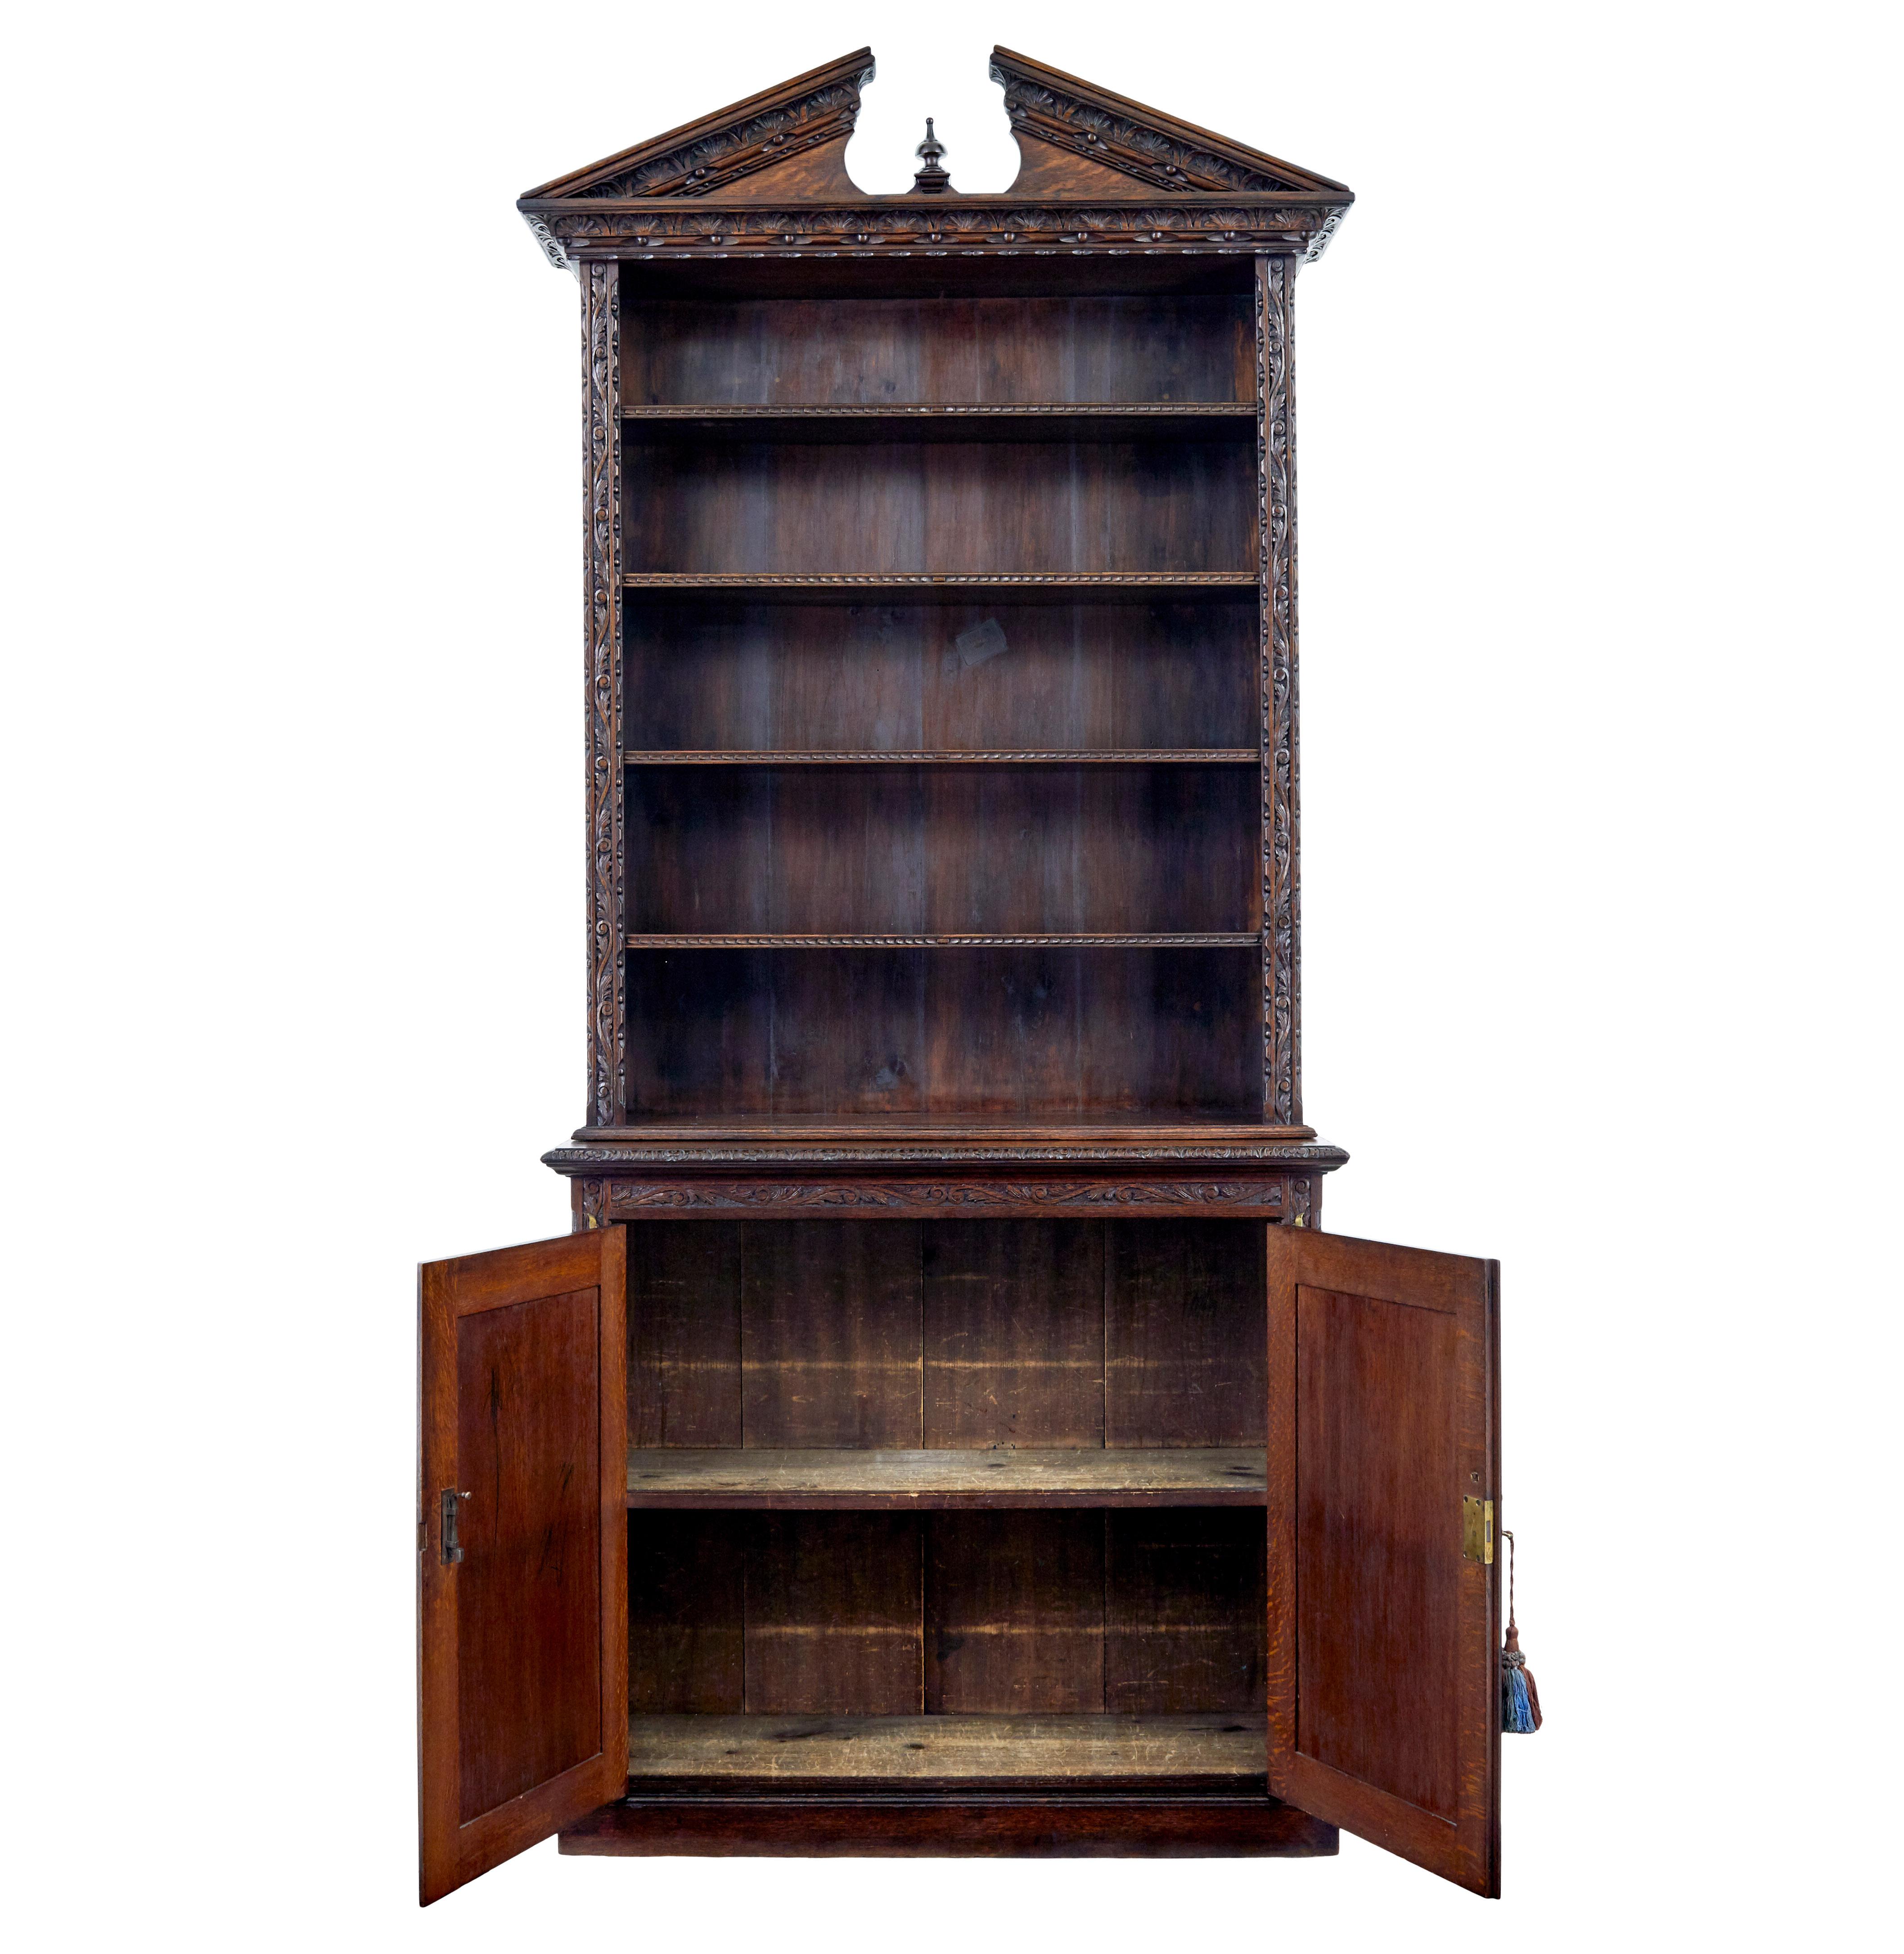 19th century inlaid oak architectural cabinet bookcase circa 1880.

Unusual open bookcase on cabinet base.  Top decorated with architectural pediment, further carved edge which is echoed on the edges of the 4 adjustable shelves.

Double door